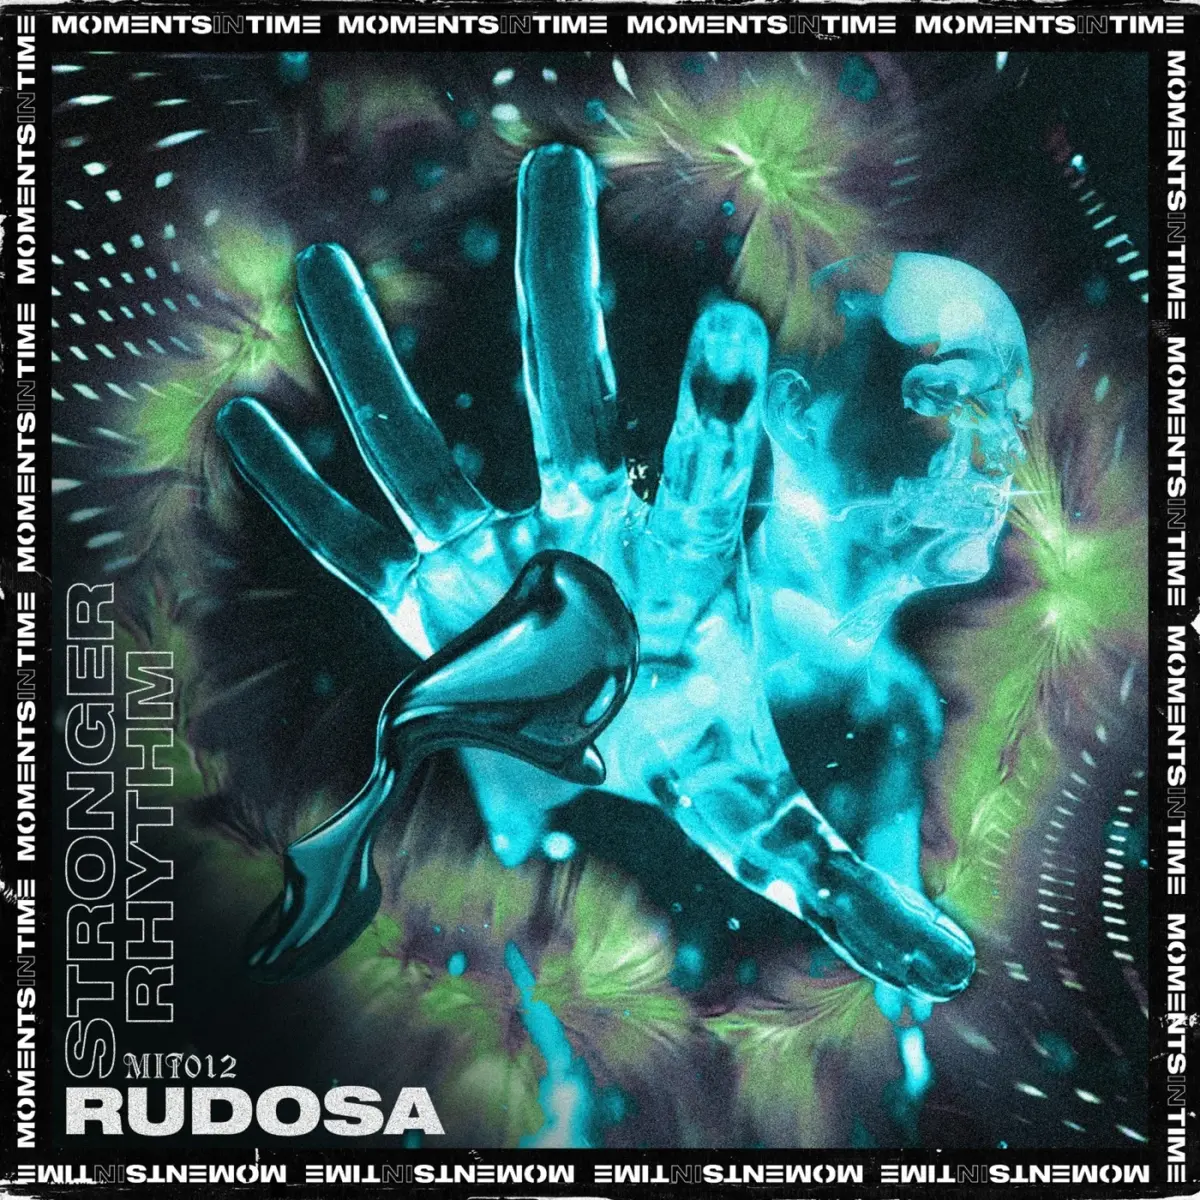 "REJECTED" - RUDOSA [MOMENTS IN TIME]